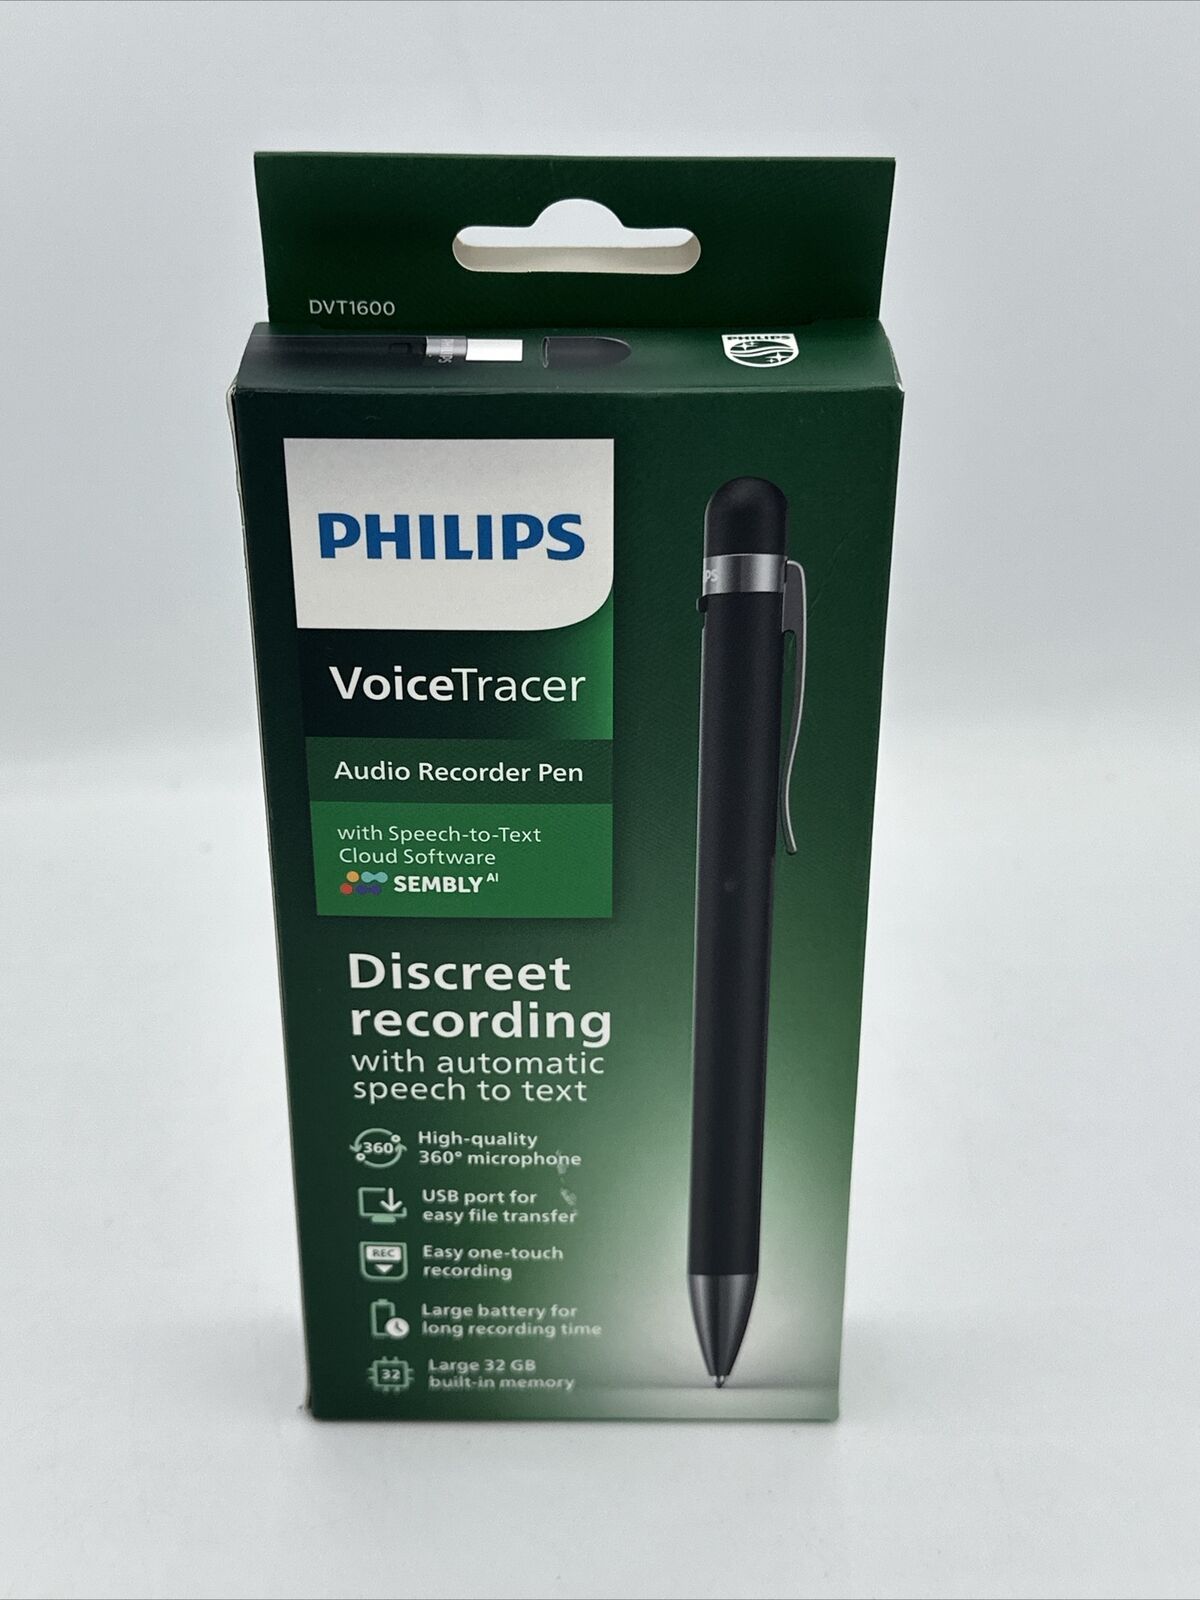 Philips DVT1600 Voice Tracer Dvt1600 Digital Recorder Pen With Sembly, 32 Gb